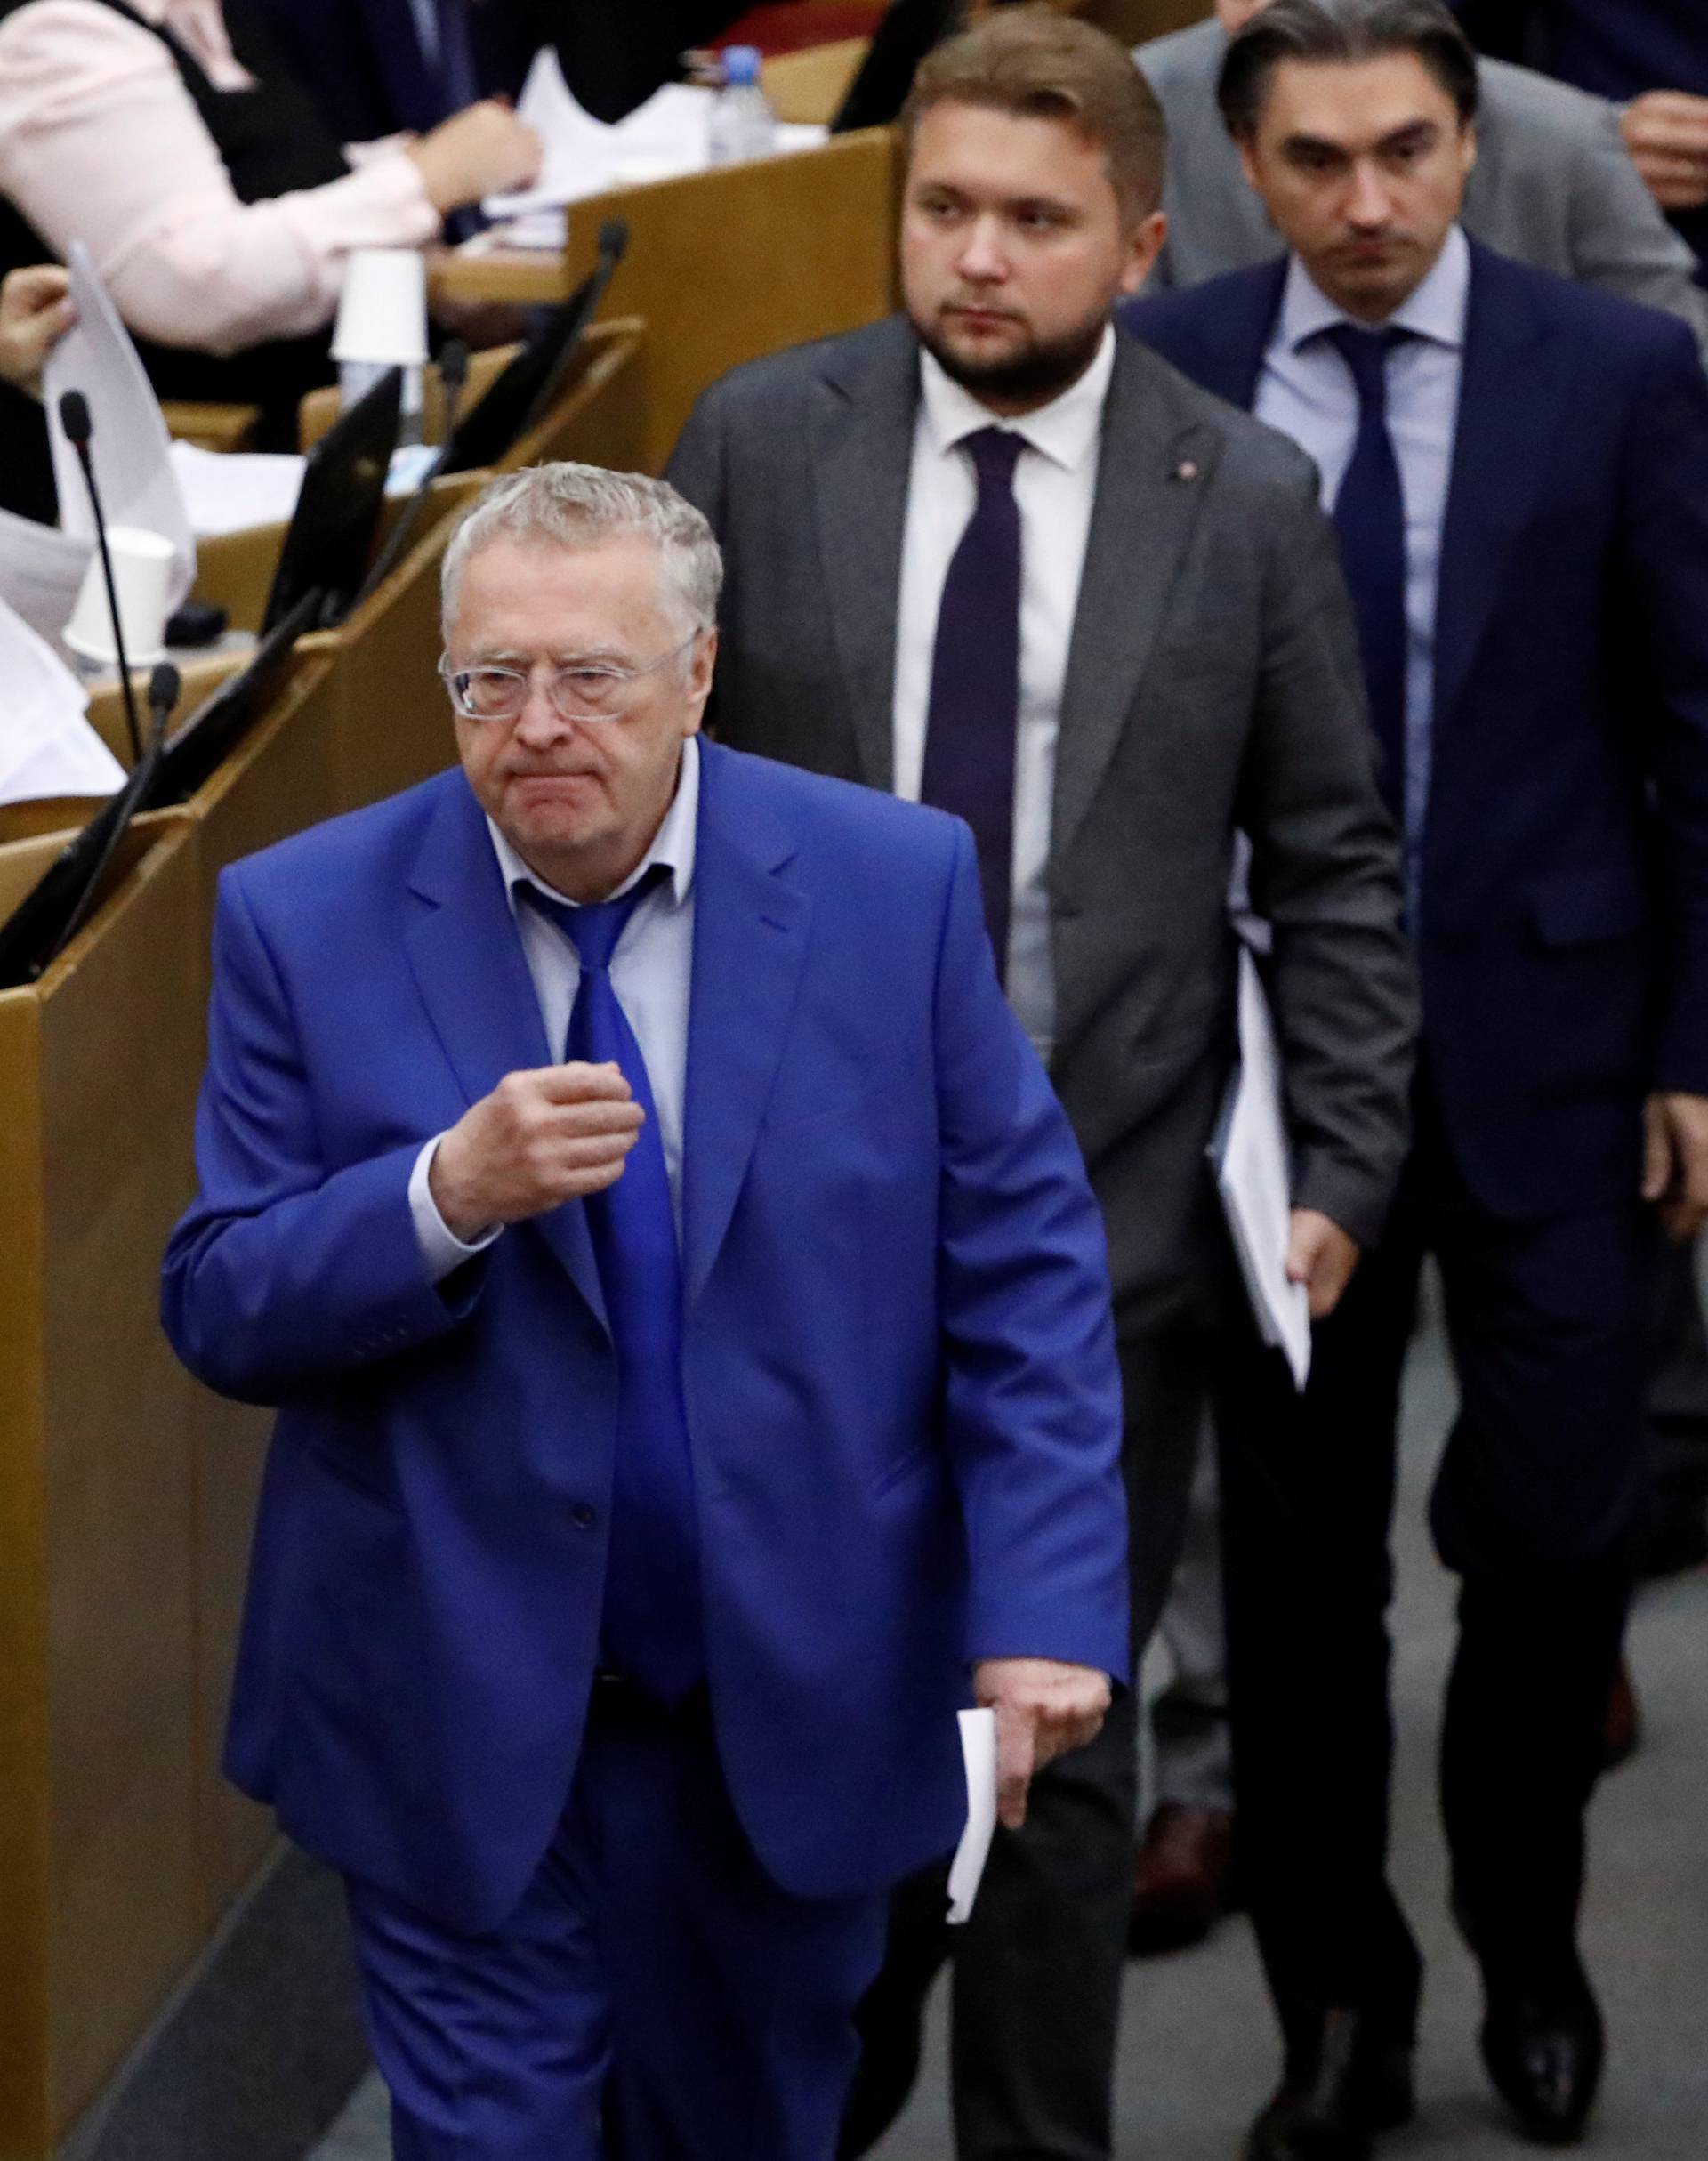 Russian Liberal Democratic Party leader Zhirinovsky attends a session during a vote on the pension reform bill at the State Duma in Moscow